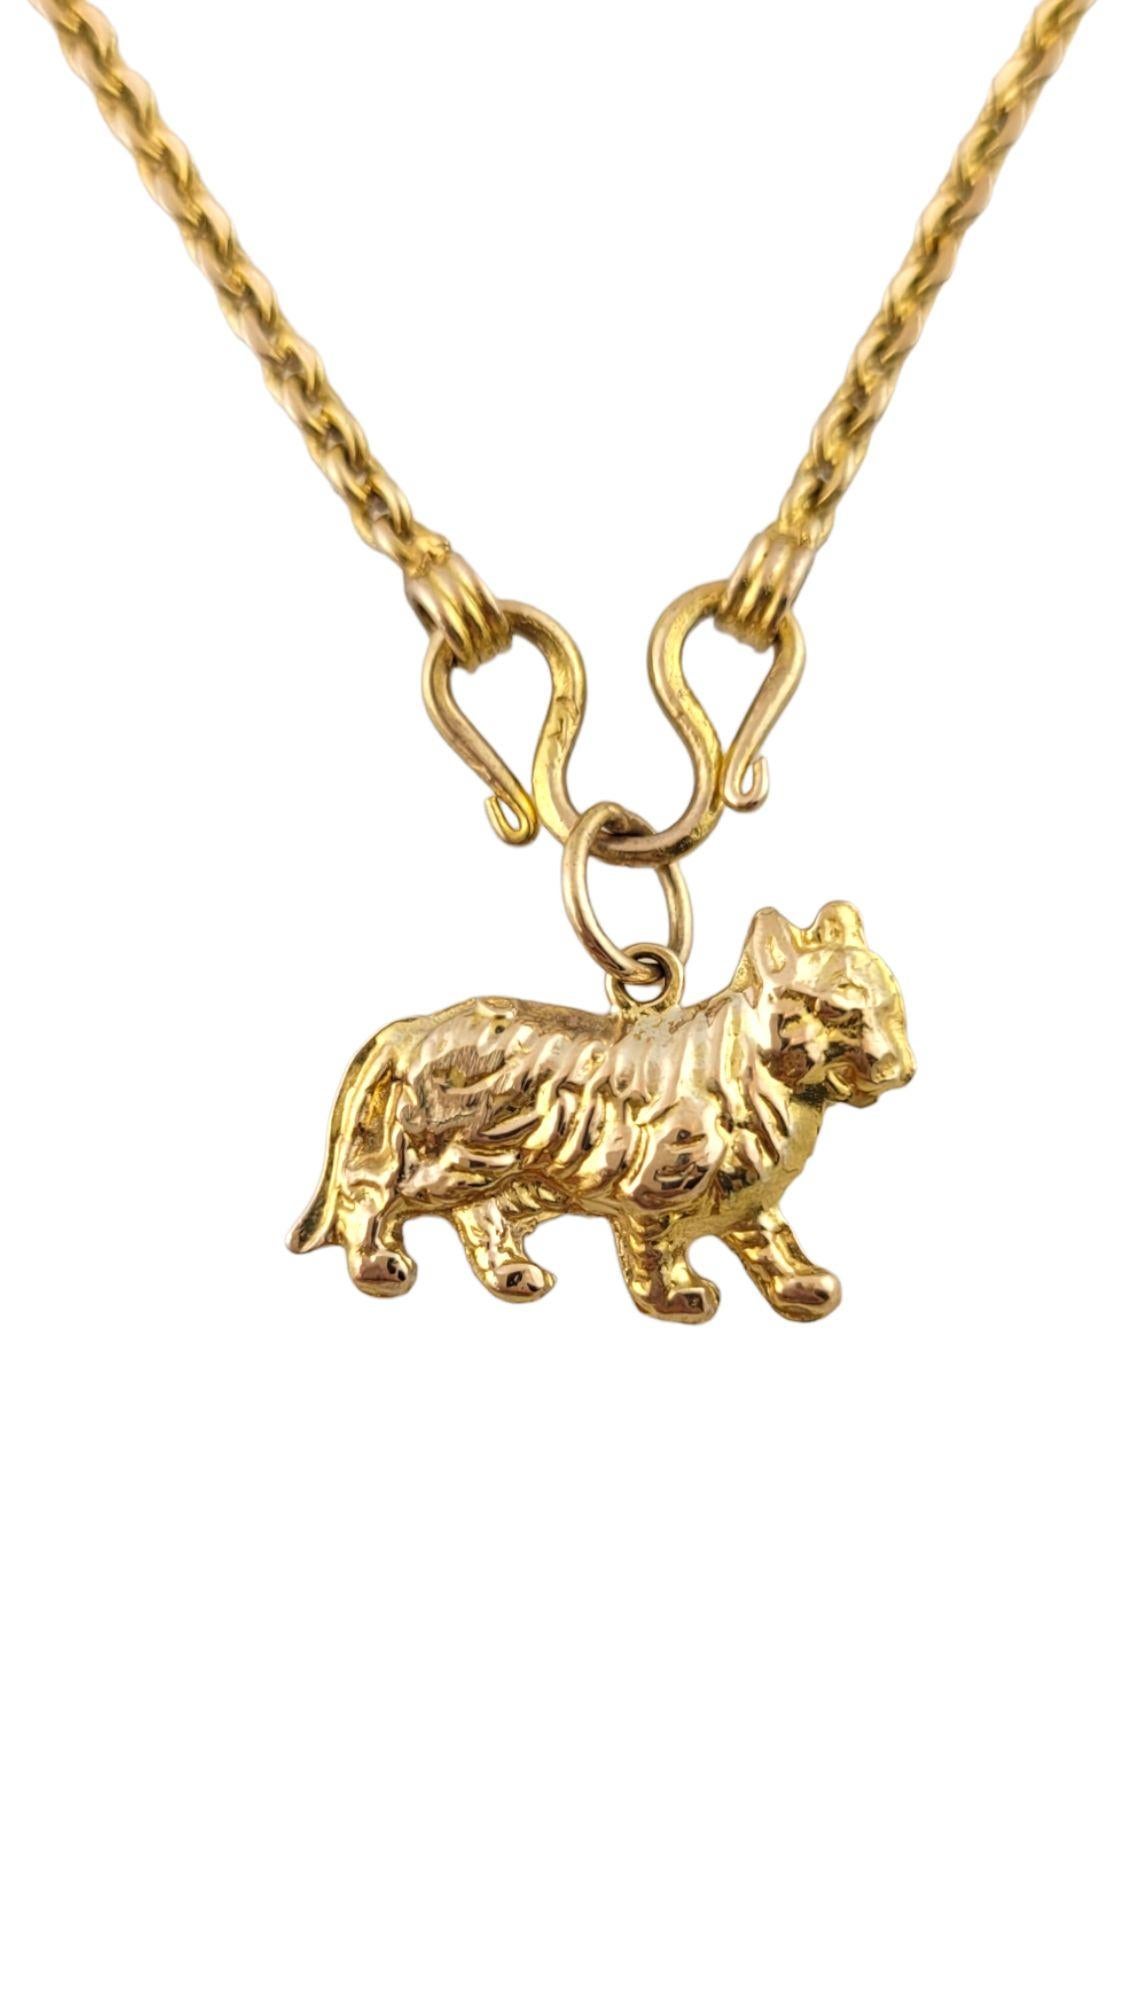 Beautiful 14K gold tiger pendant on a gorgeous 14K gold chain to match!

Chain length: 16 1/4